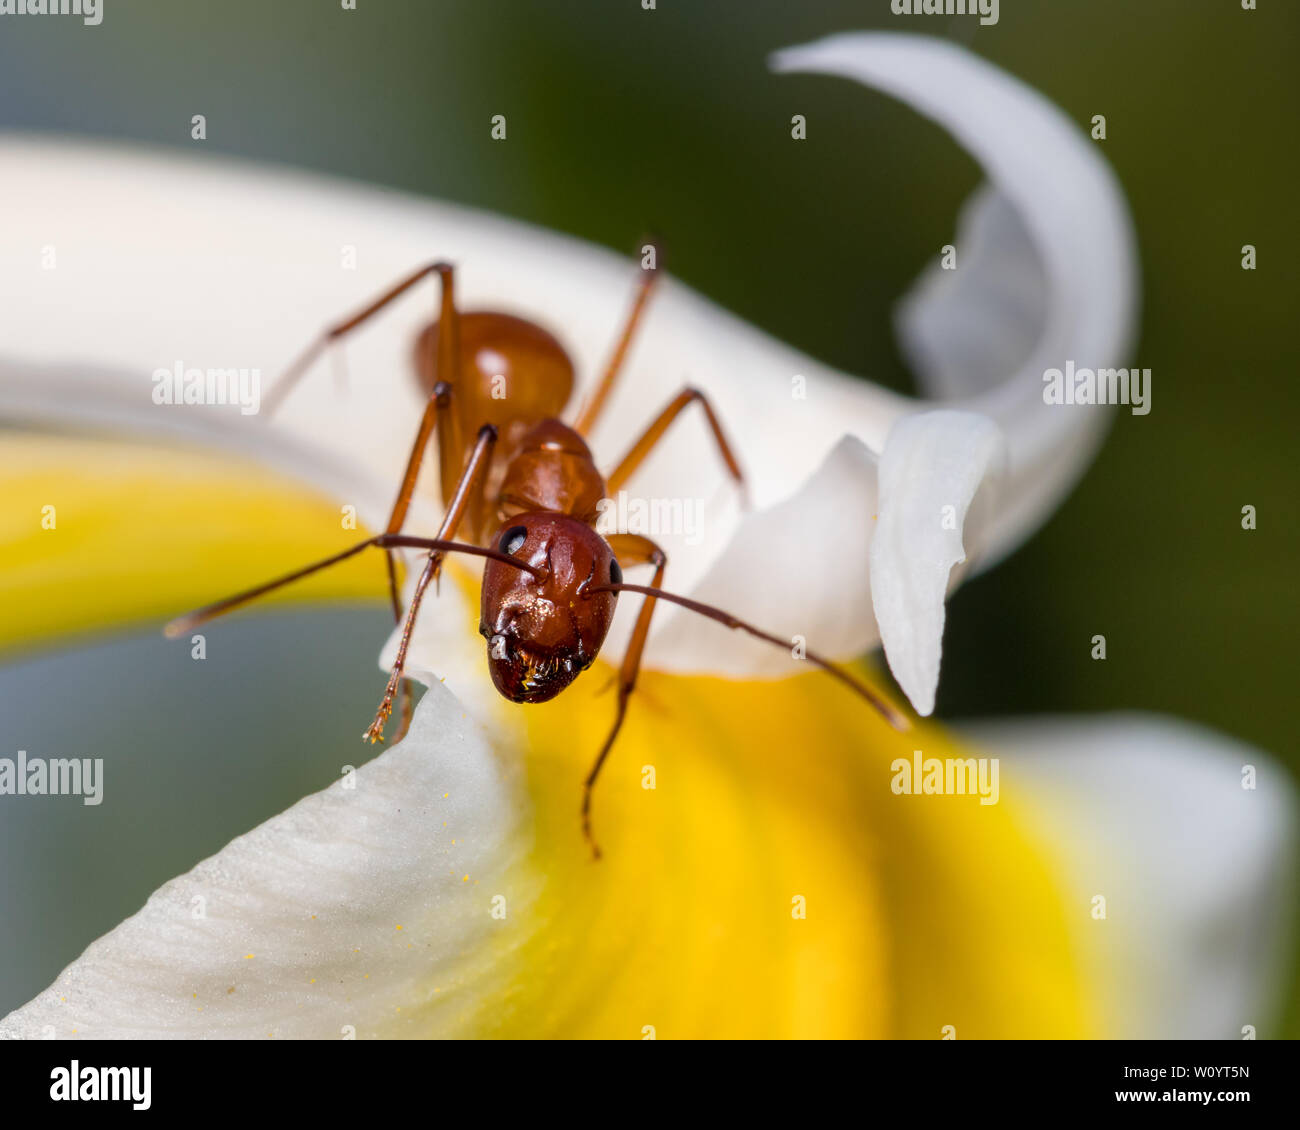 Large brown ant, Camponotus, climbing on flower Stock Photo